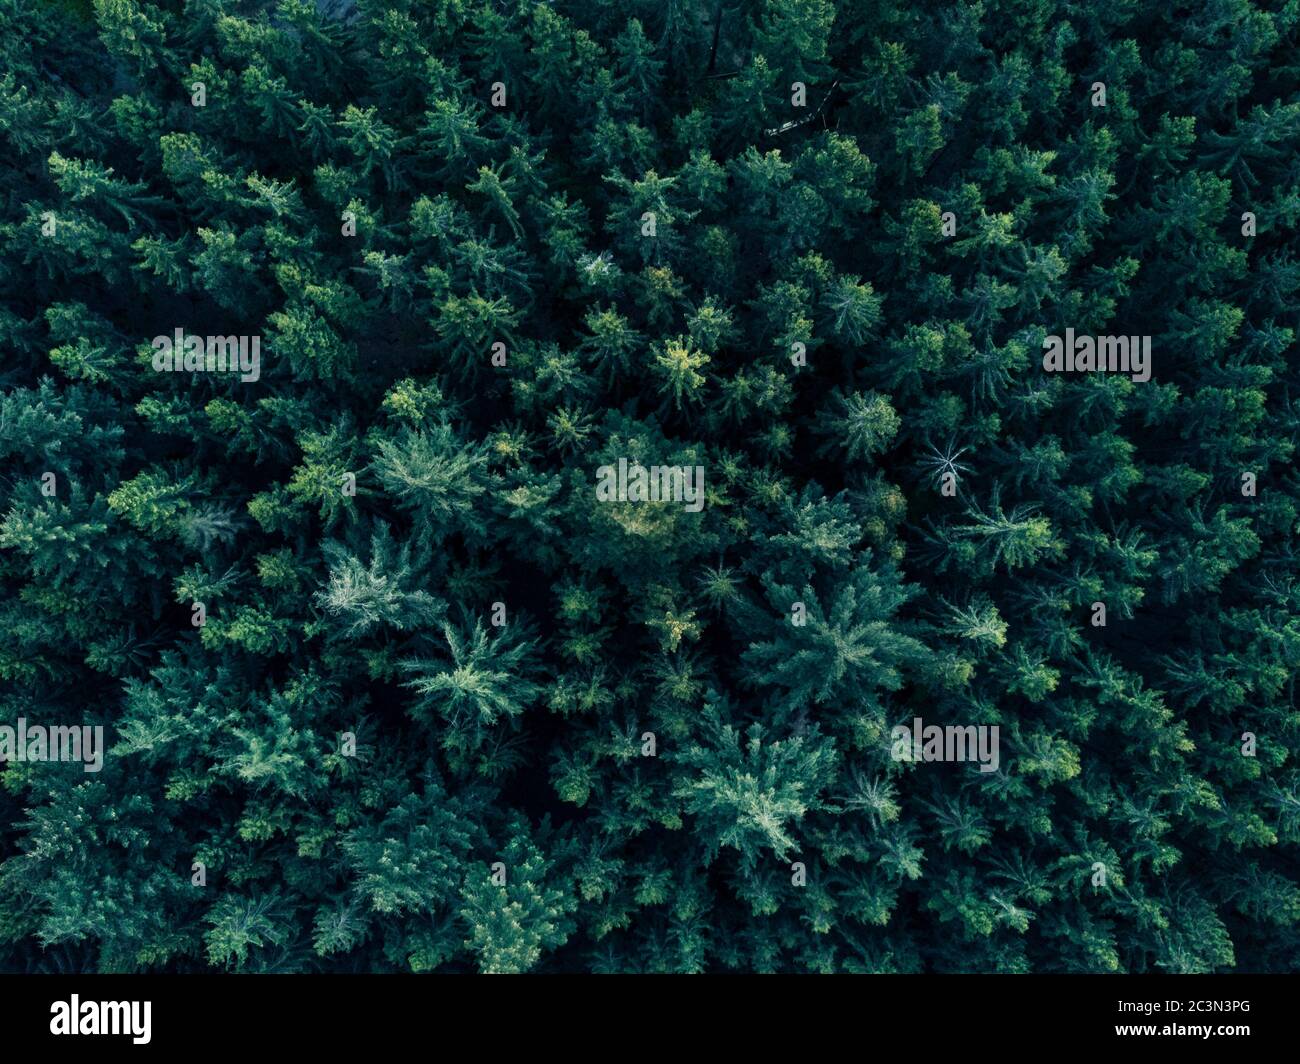 Aerial Overhead View of Tree tops in super rich dark green color shot in Germany Stock Photo